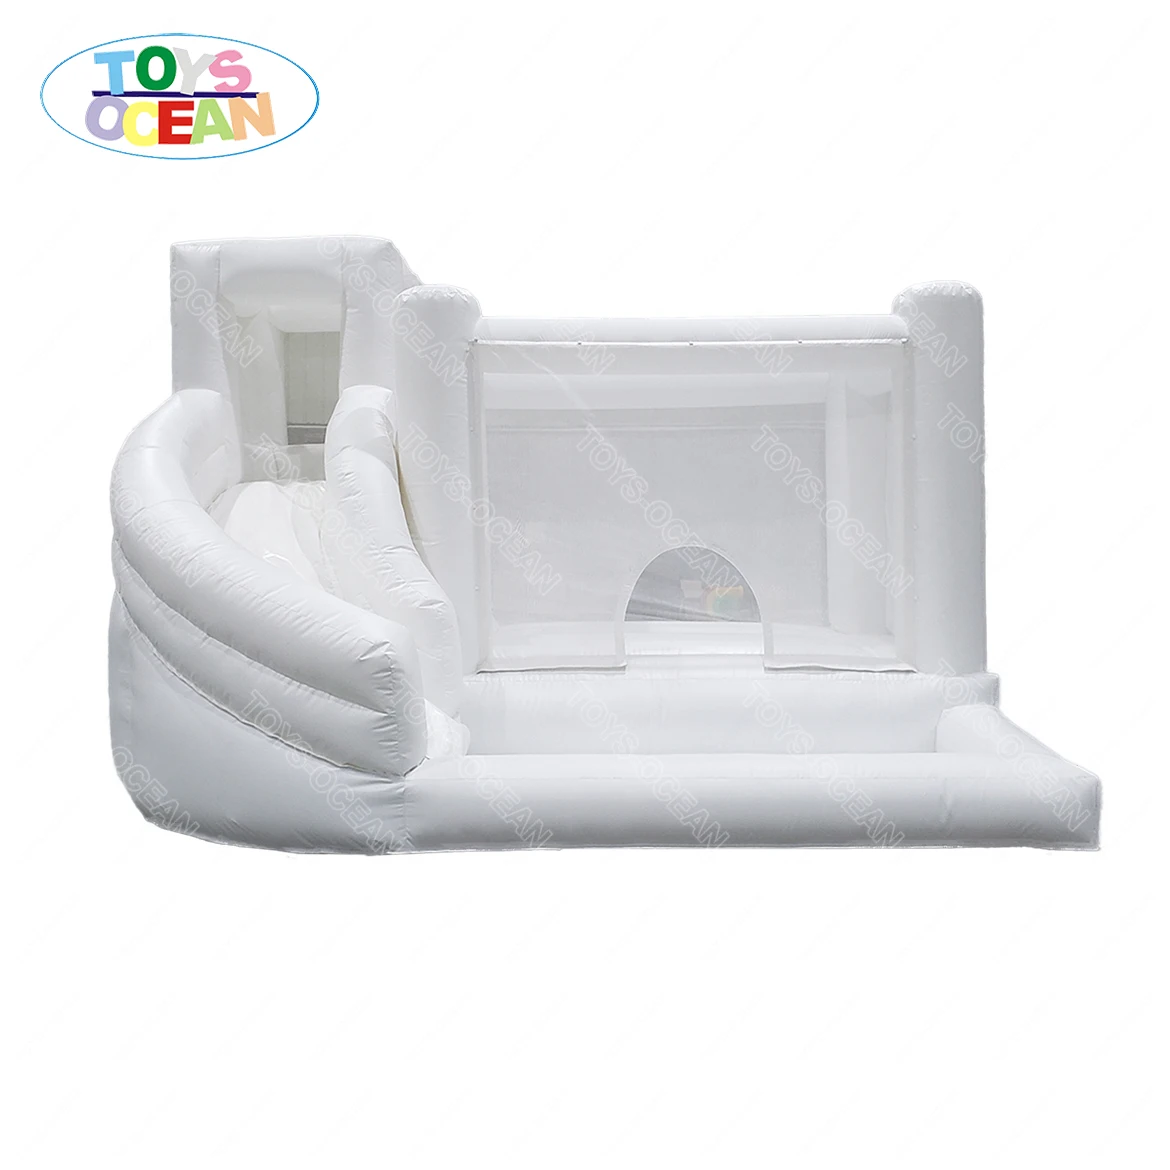 

Commercial grade white inflatable slide combo kids bounce house inflatable soft ball pit jumping castle